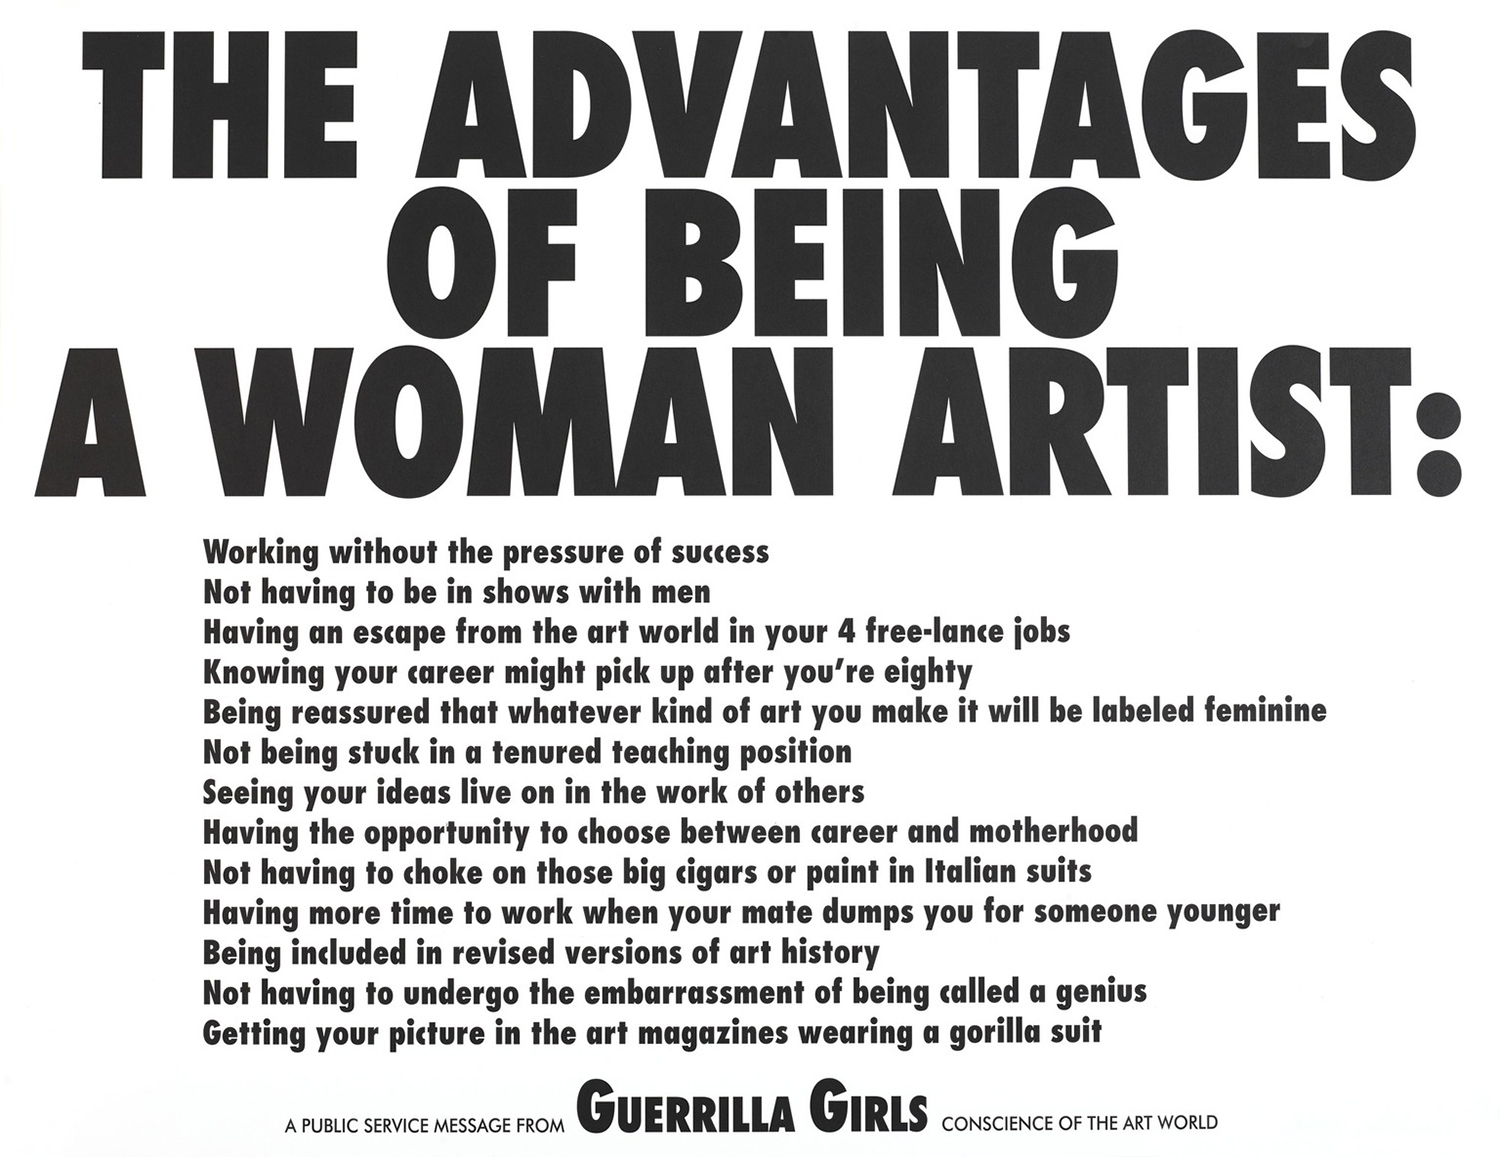 Should We Still Be Laying Claim to the Word “Woman”? - AWARE Artistes femmes / women artists